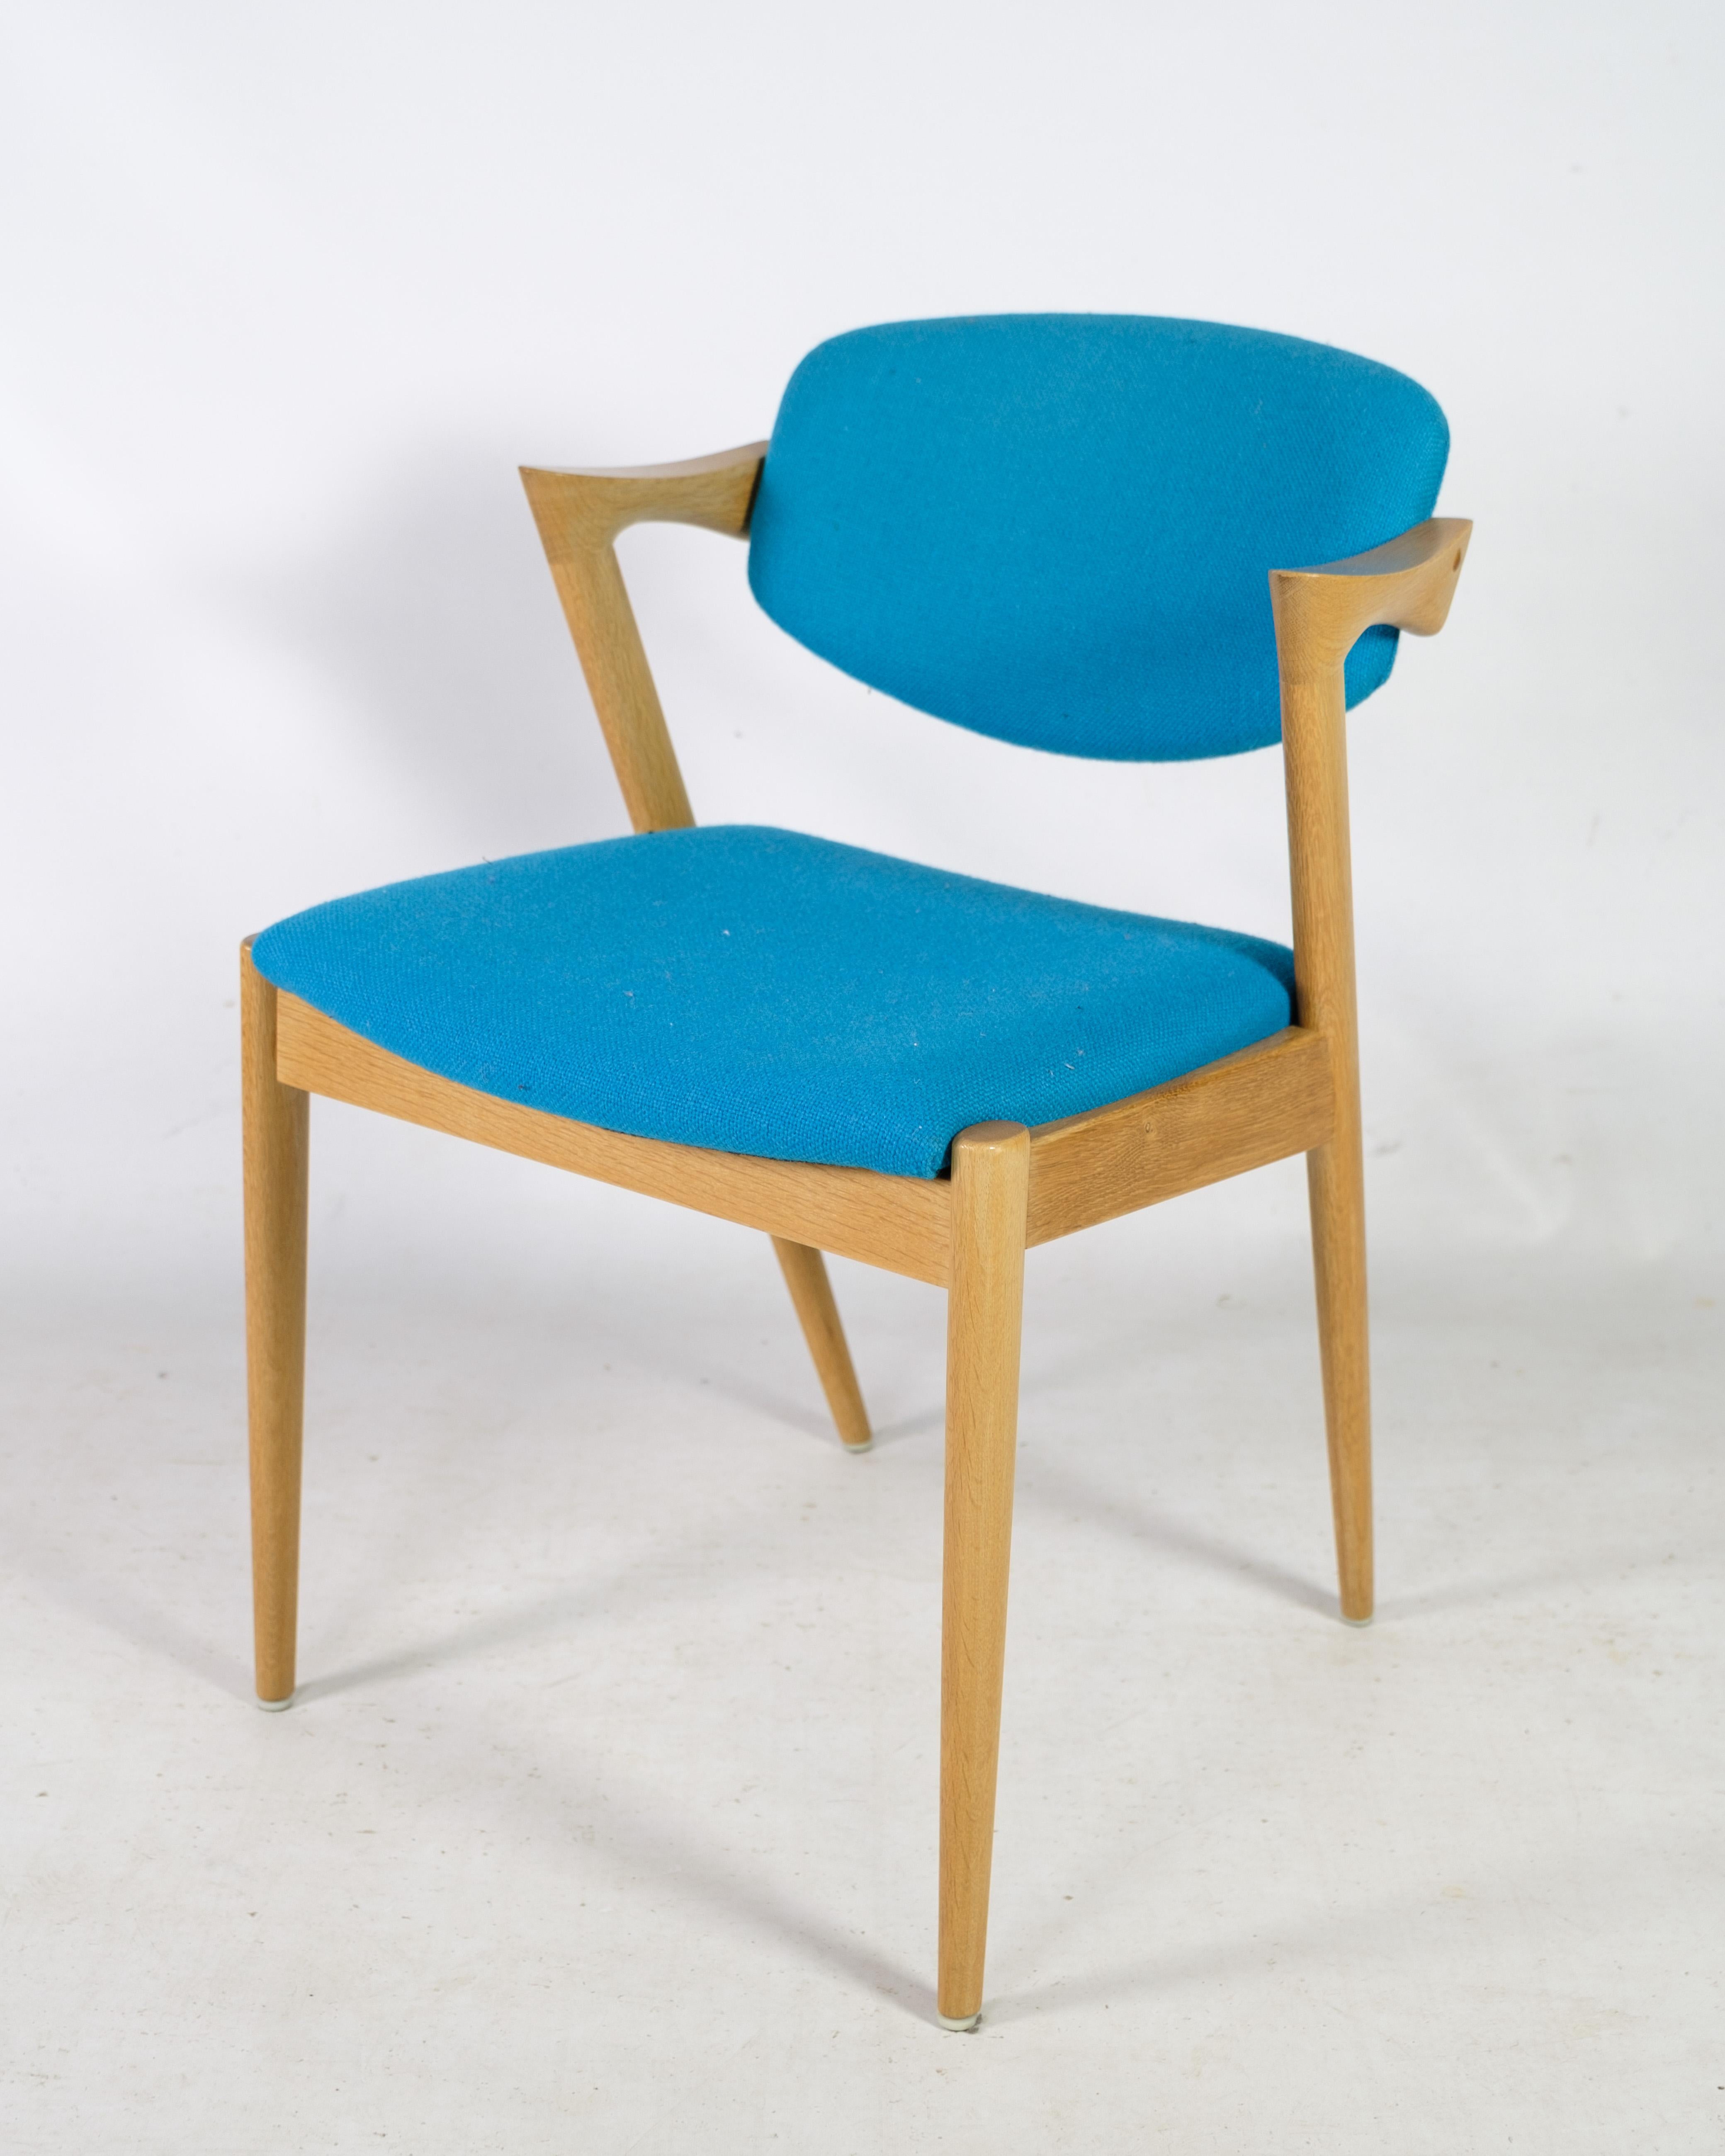 This set of 8 dining chairs is truly an iconic example of the timeless elegance that characterizes Danish furniture design from the Mid-20th Century. The chairs are model 42, designed by the renowned Danish designer Kai Kristiansen and manufactured